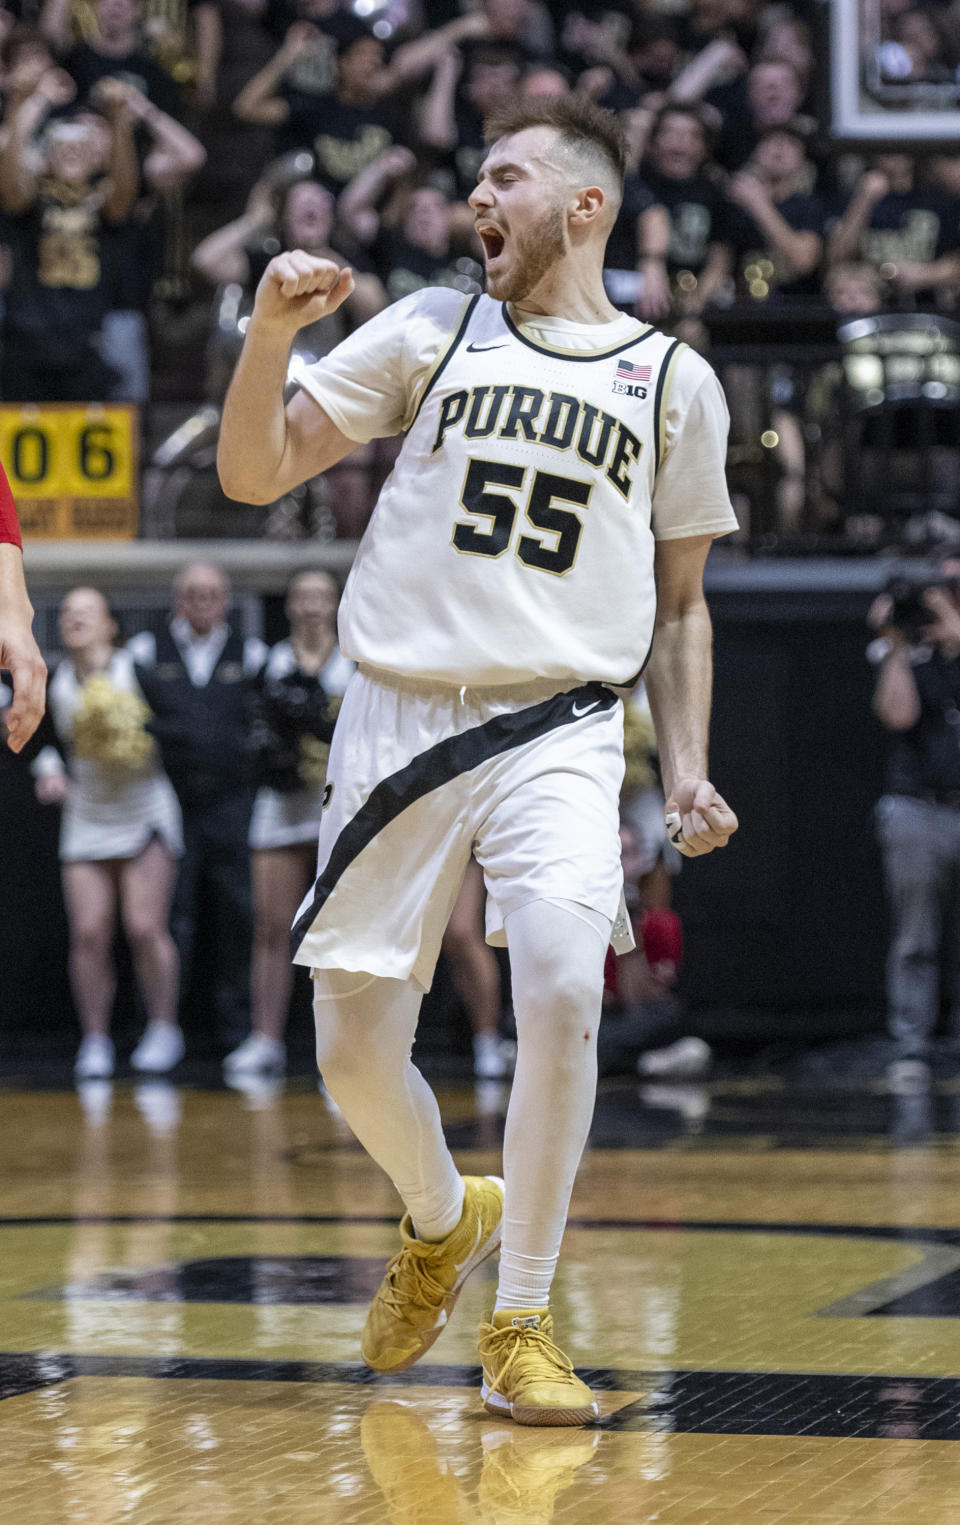 Purdue guard Sasha Stefanovic (55) reacts after scoring during the second half of an NCAA college basketball game against Indiana, Saturday, March 5, 2022, in West Lafayette, Ind. (AP Photo/Doug McSchooler)